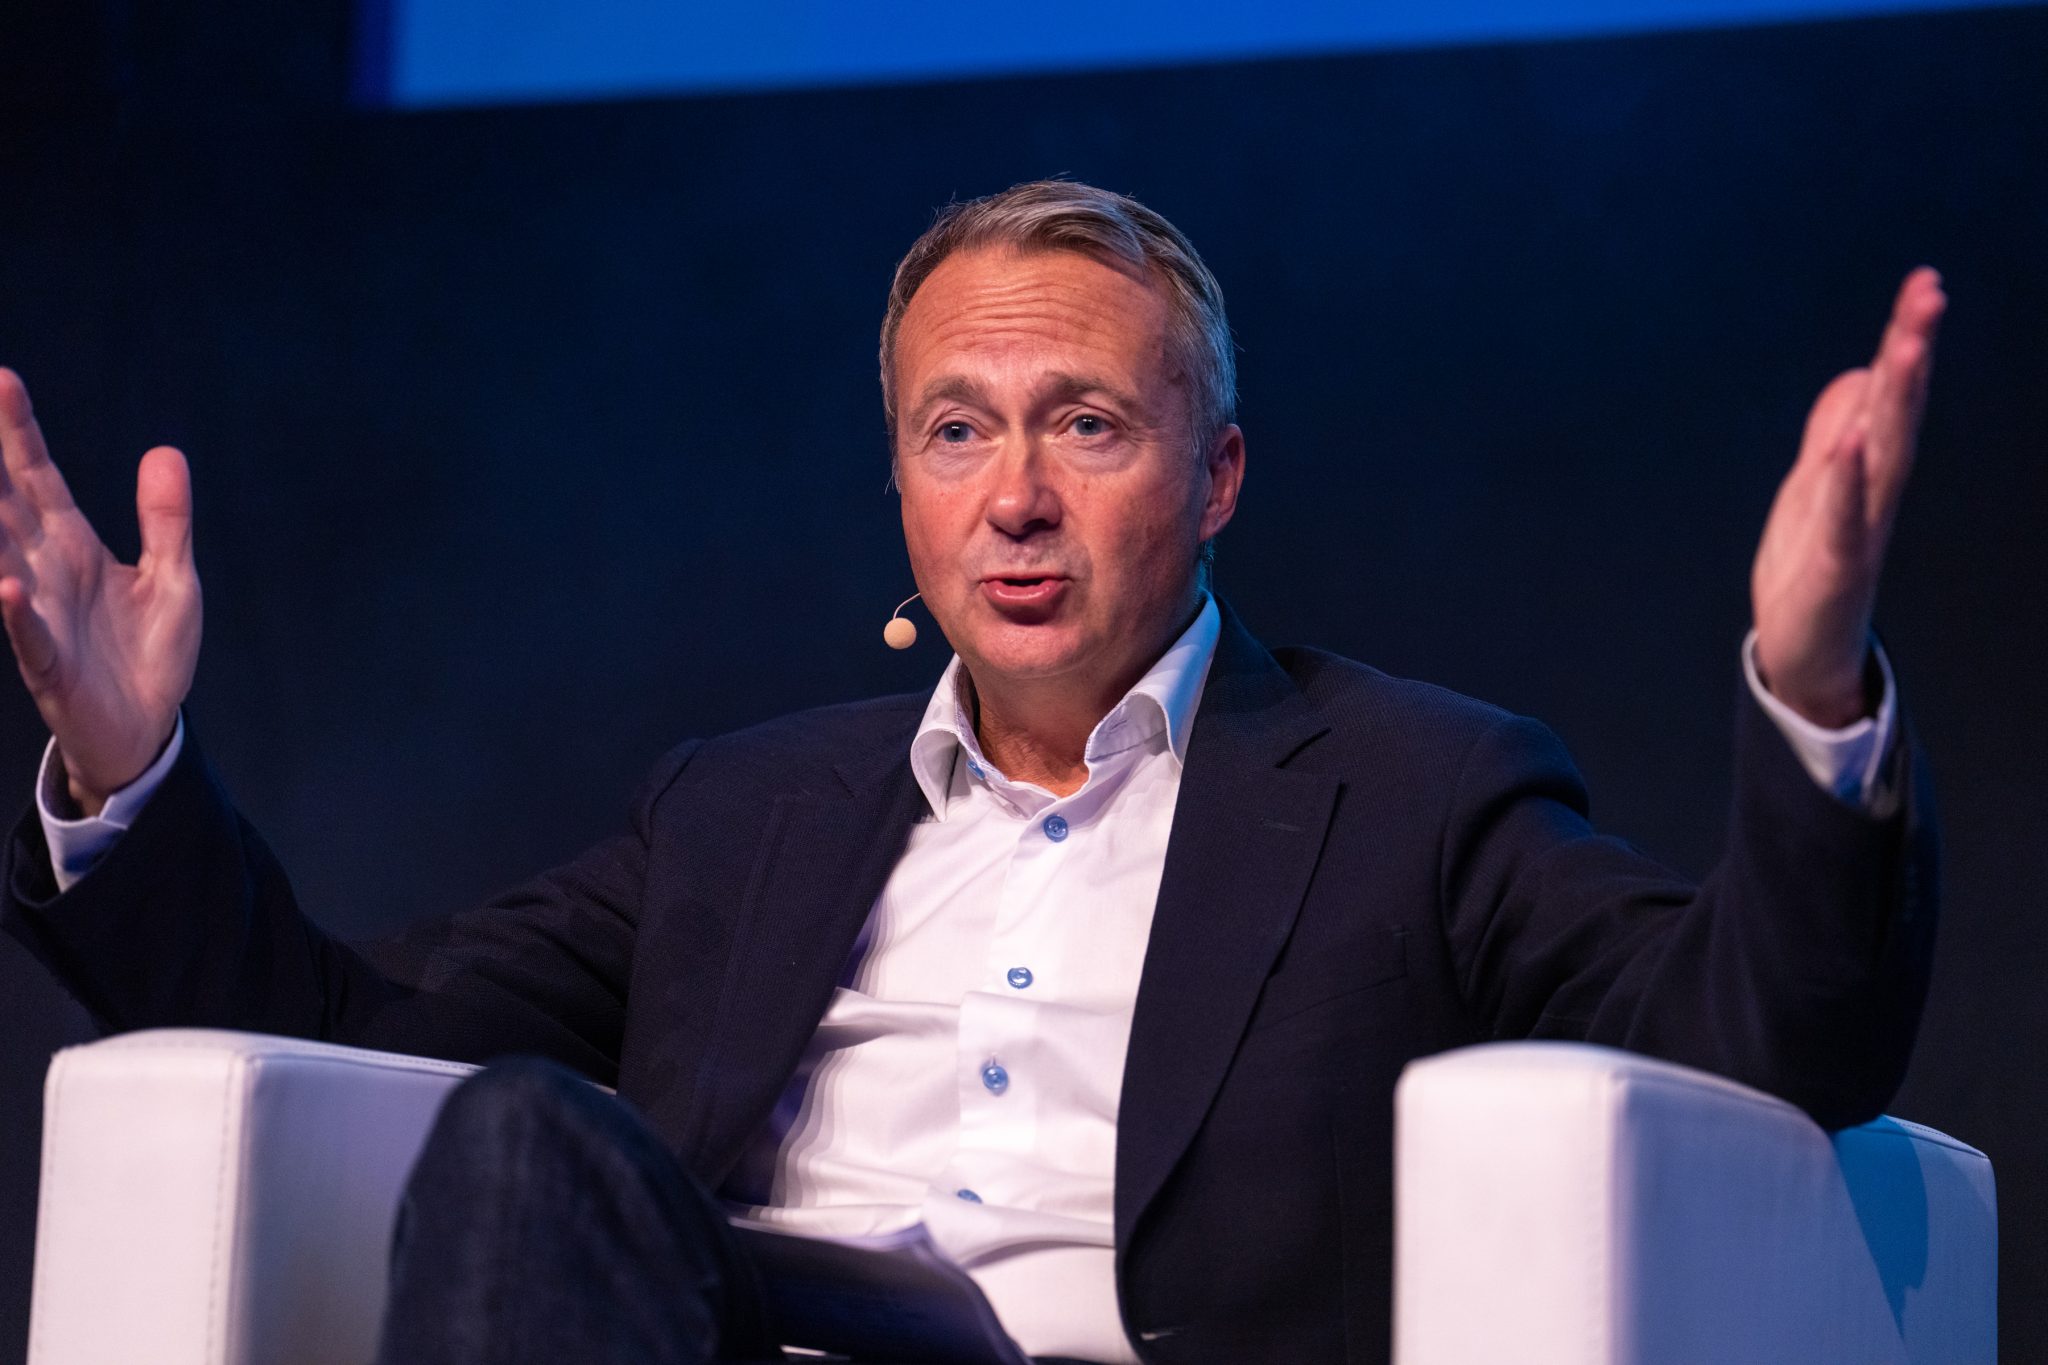 Paul Abbott, CEO of American Express Global Business Travel, speaking at the Global Business Travel Association’s inaugural Sustainability Summit, held in Brussels on Nov. 8, 2022